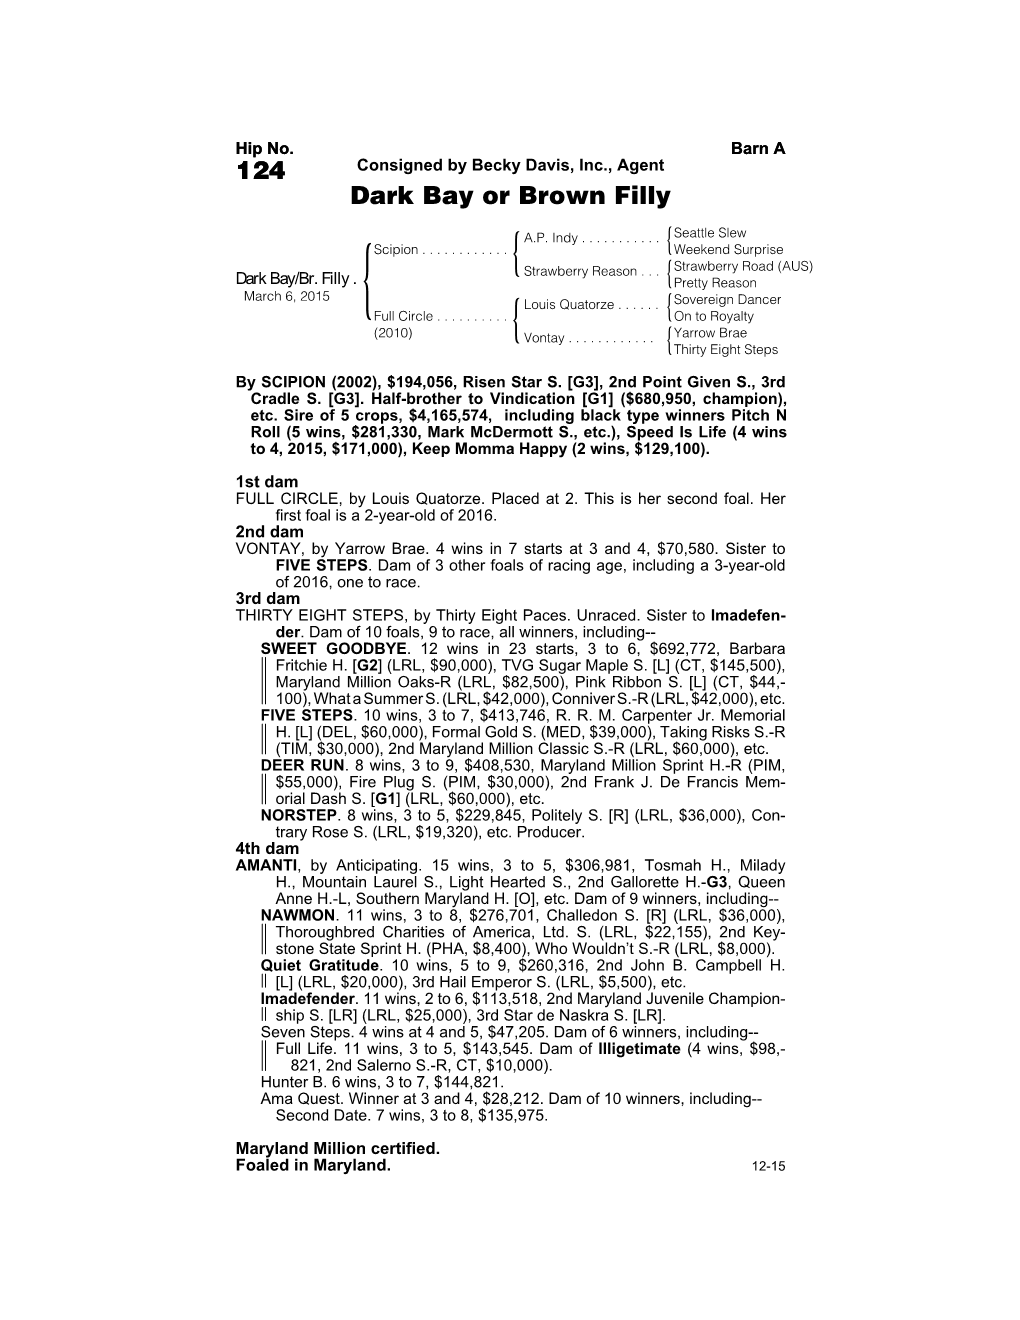 124 Consigned by Becky Davis, Inc., Agent Dark Bay Or Brown Filly